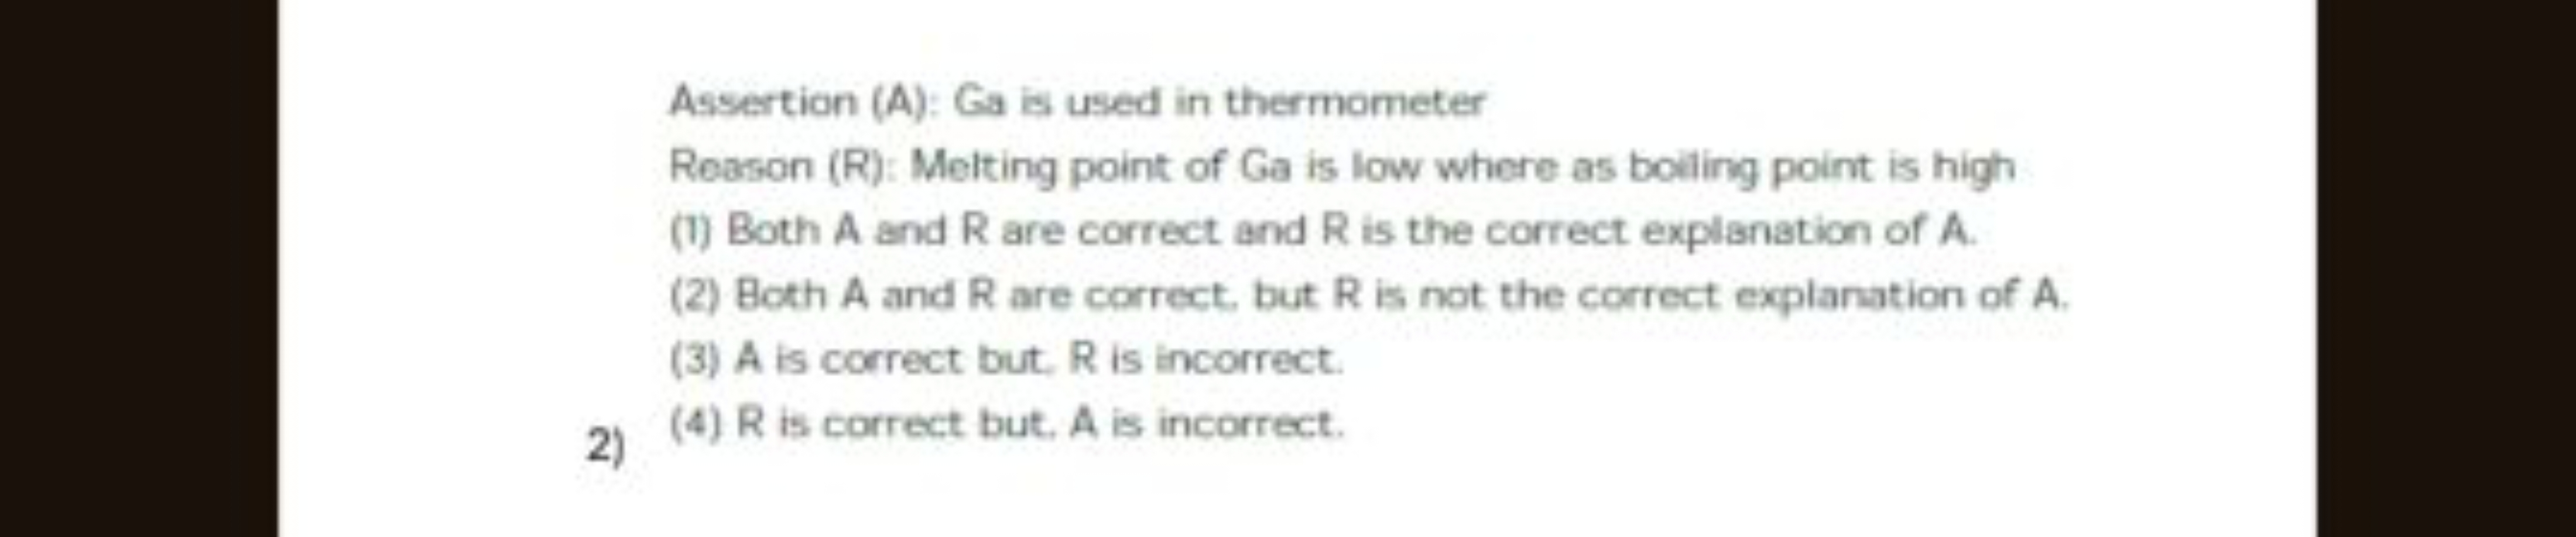 Assertion (A): Ga is used in thermometer
Reason ( R ): Melting point o